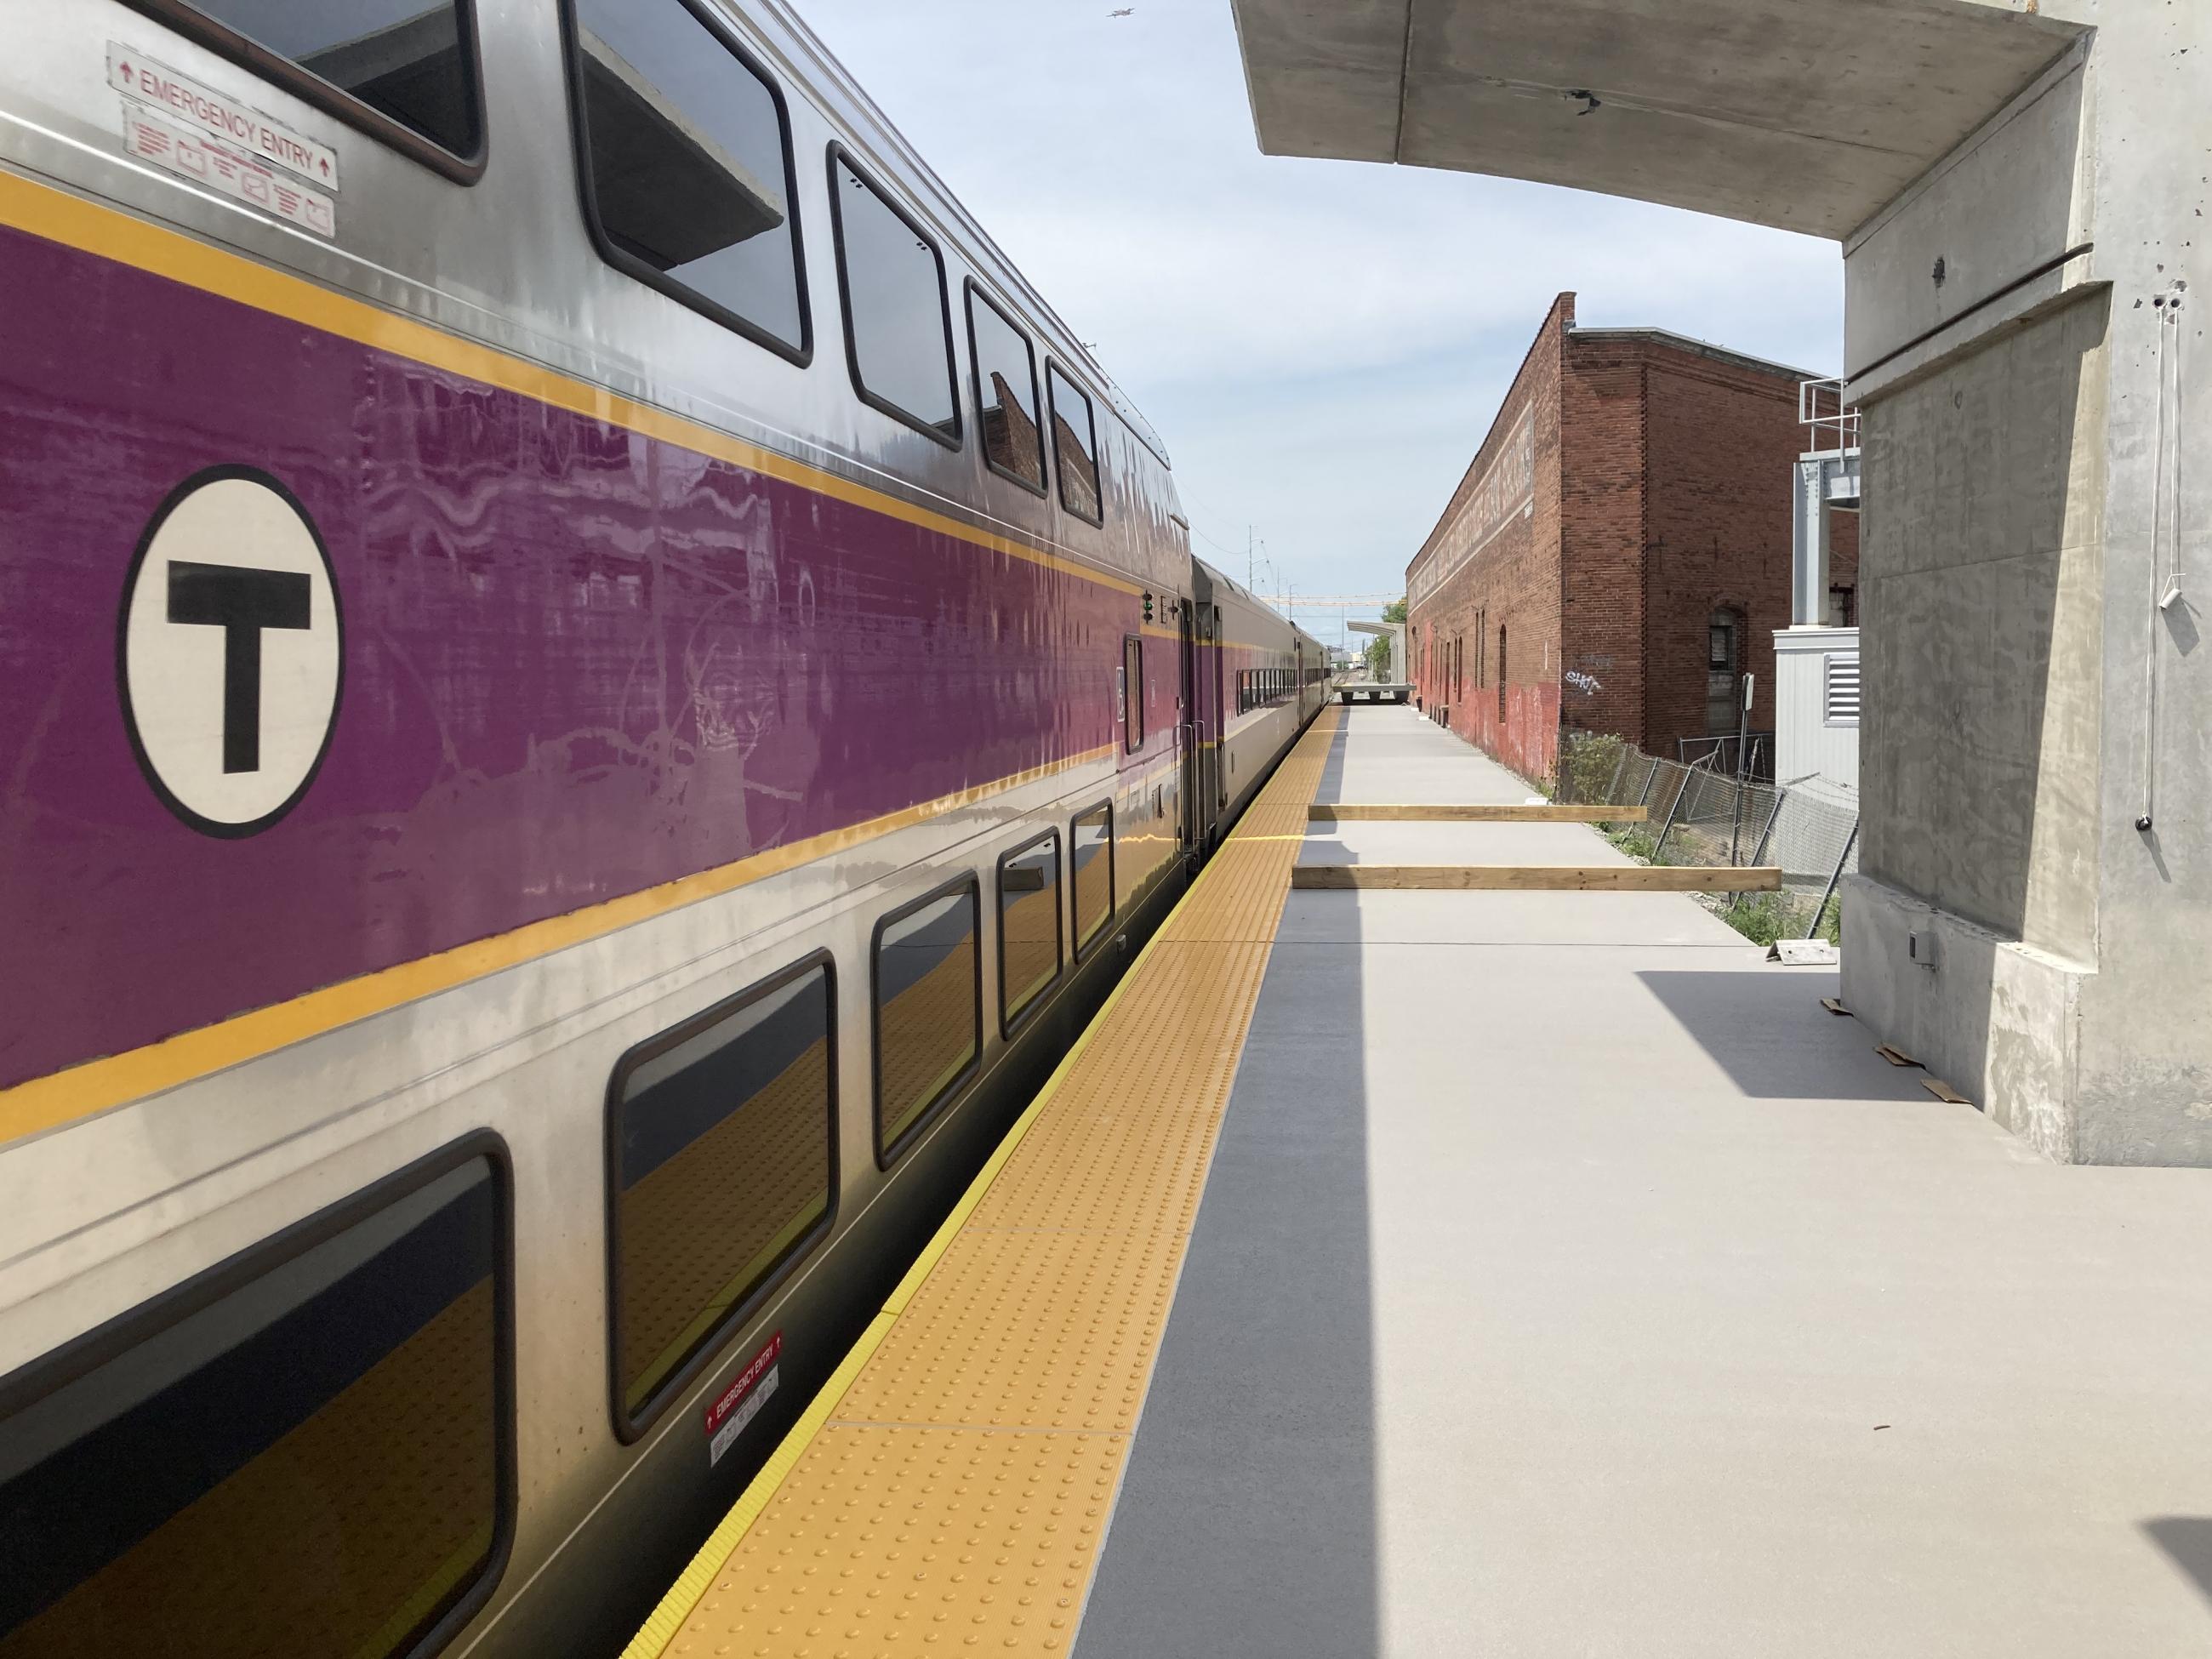 A Commuter Rail train is stopped at the inbound platform at Chelsea Station next to a newly installed platform.